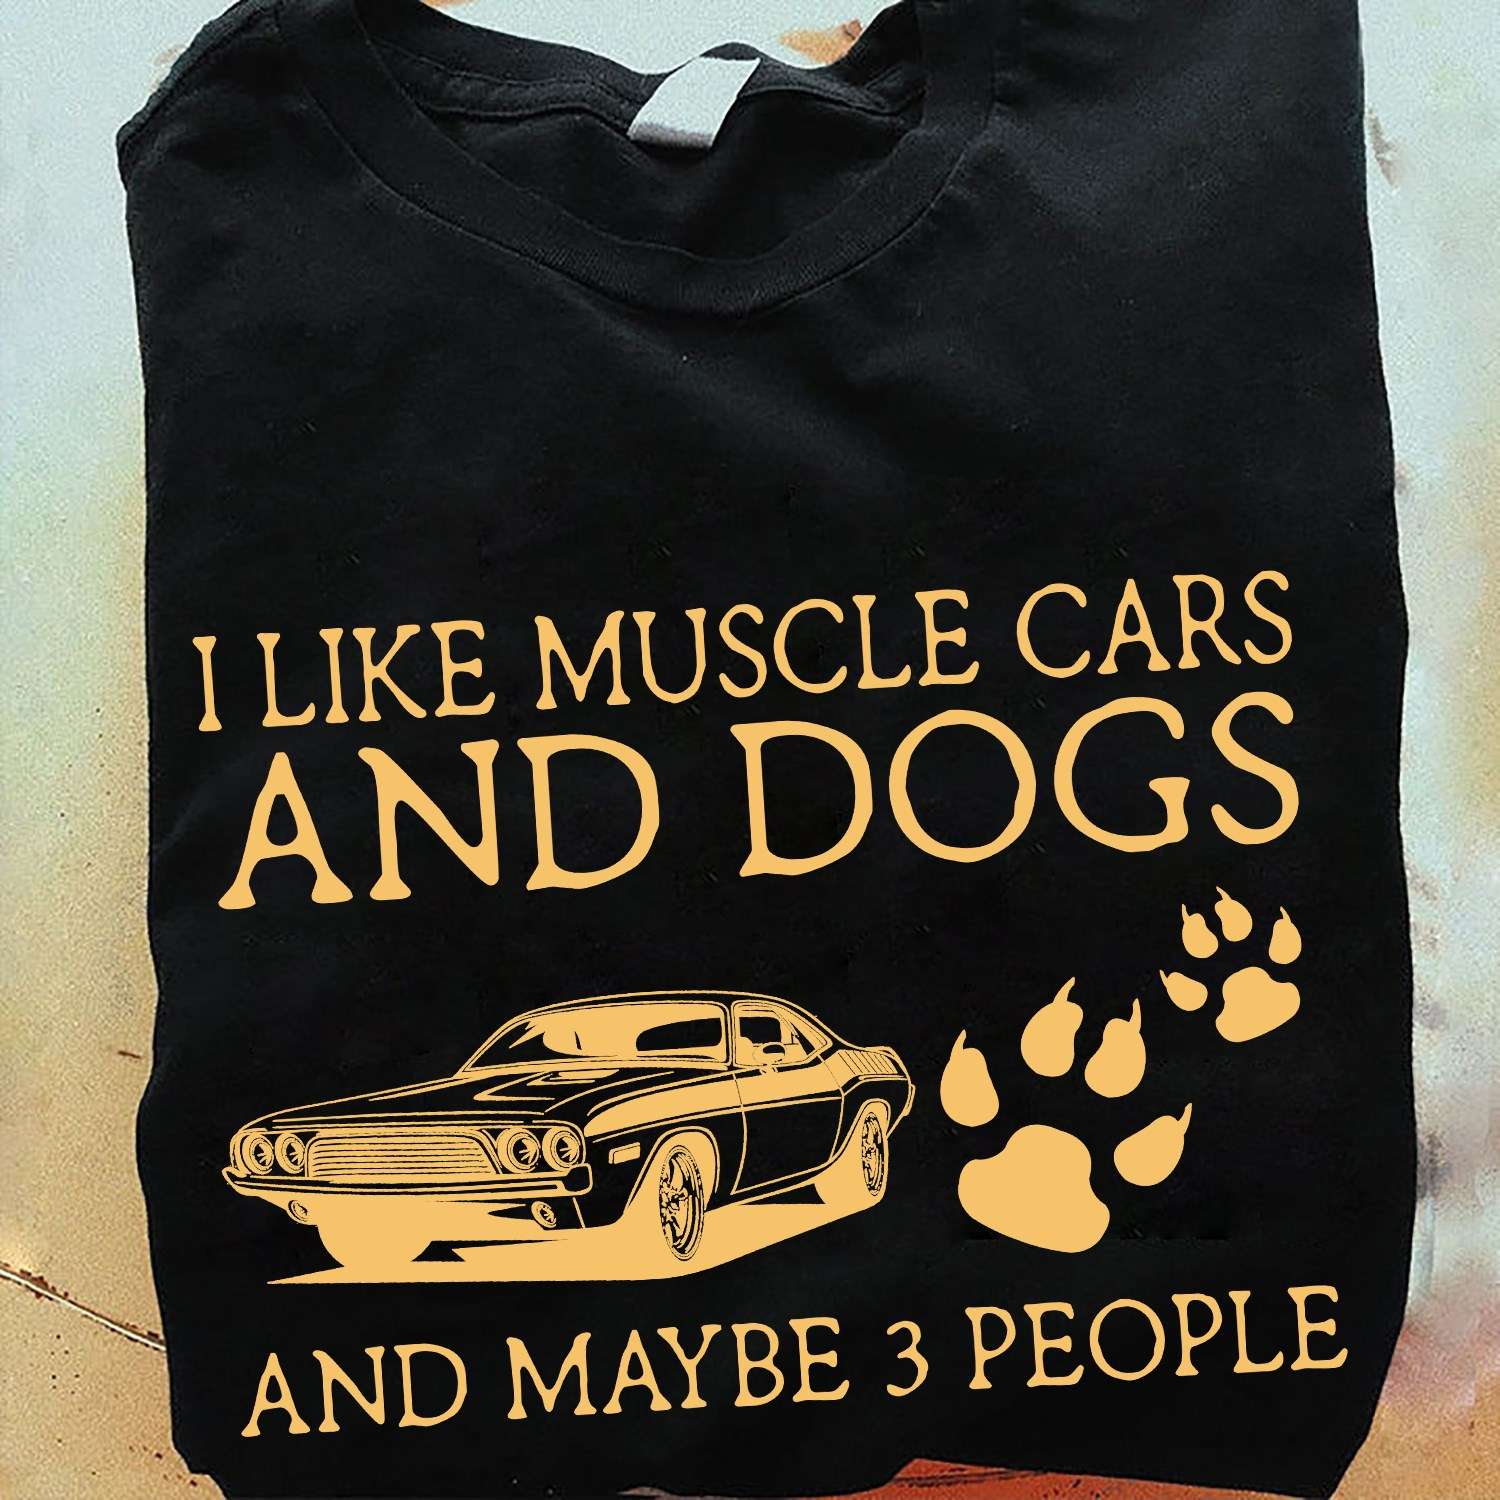 I like muscle cars and dogs and maybe 3 people - Dog footprint